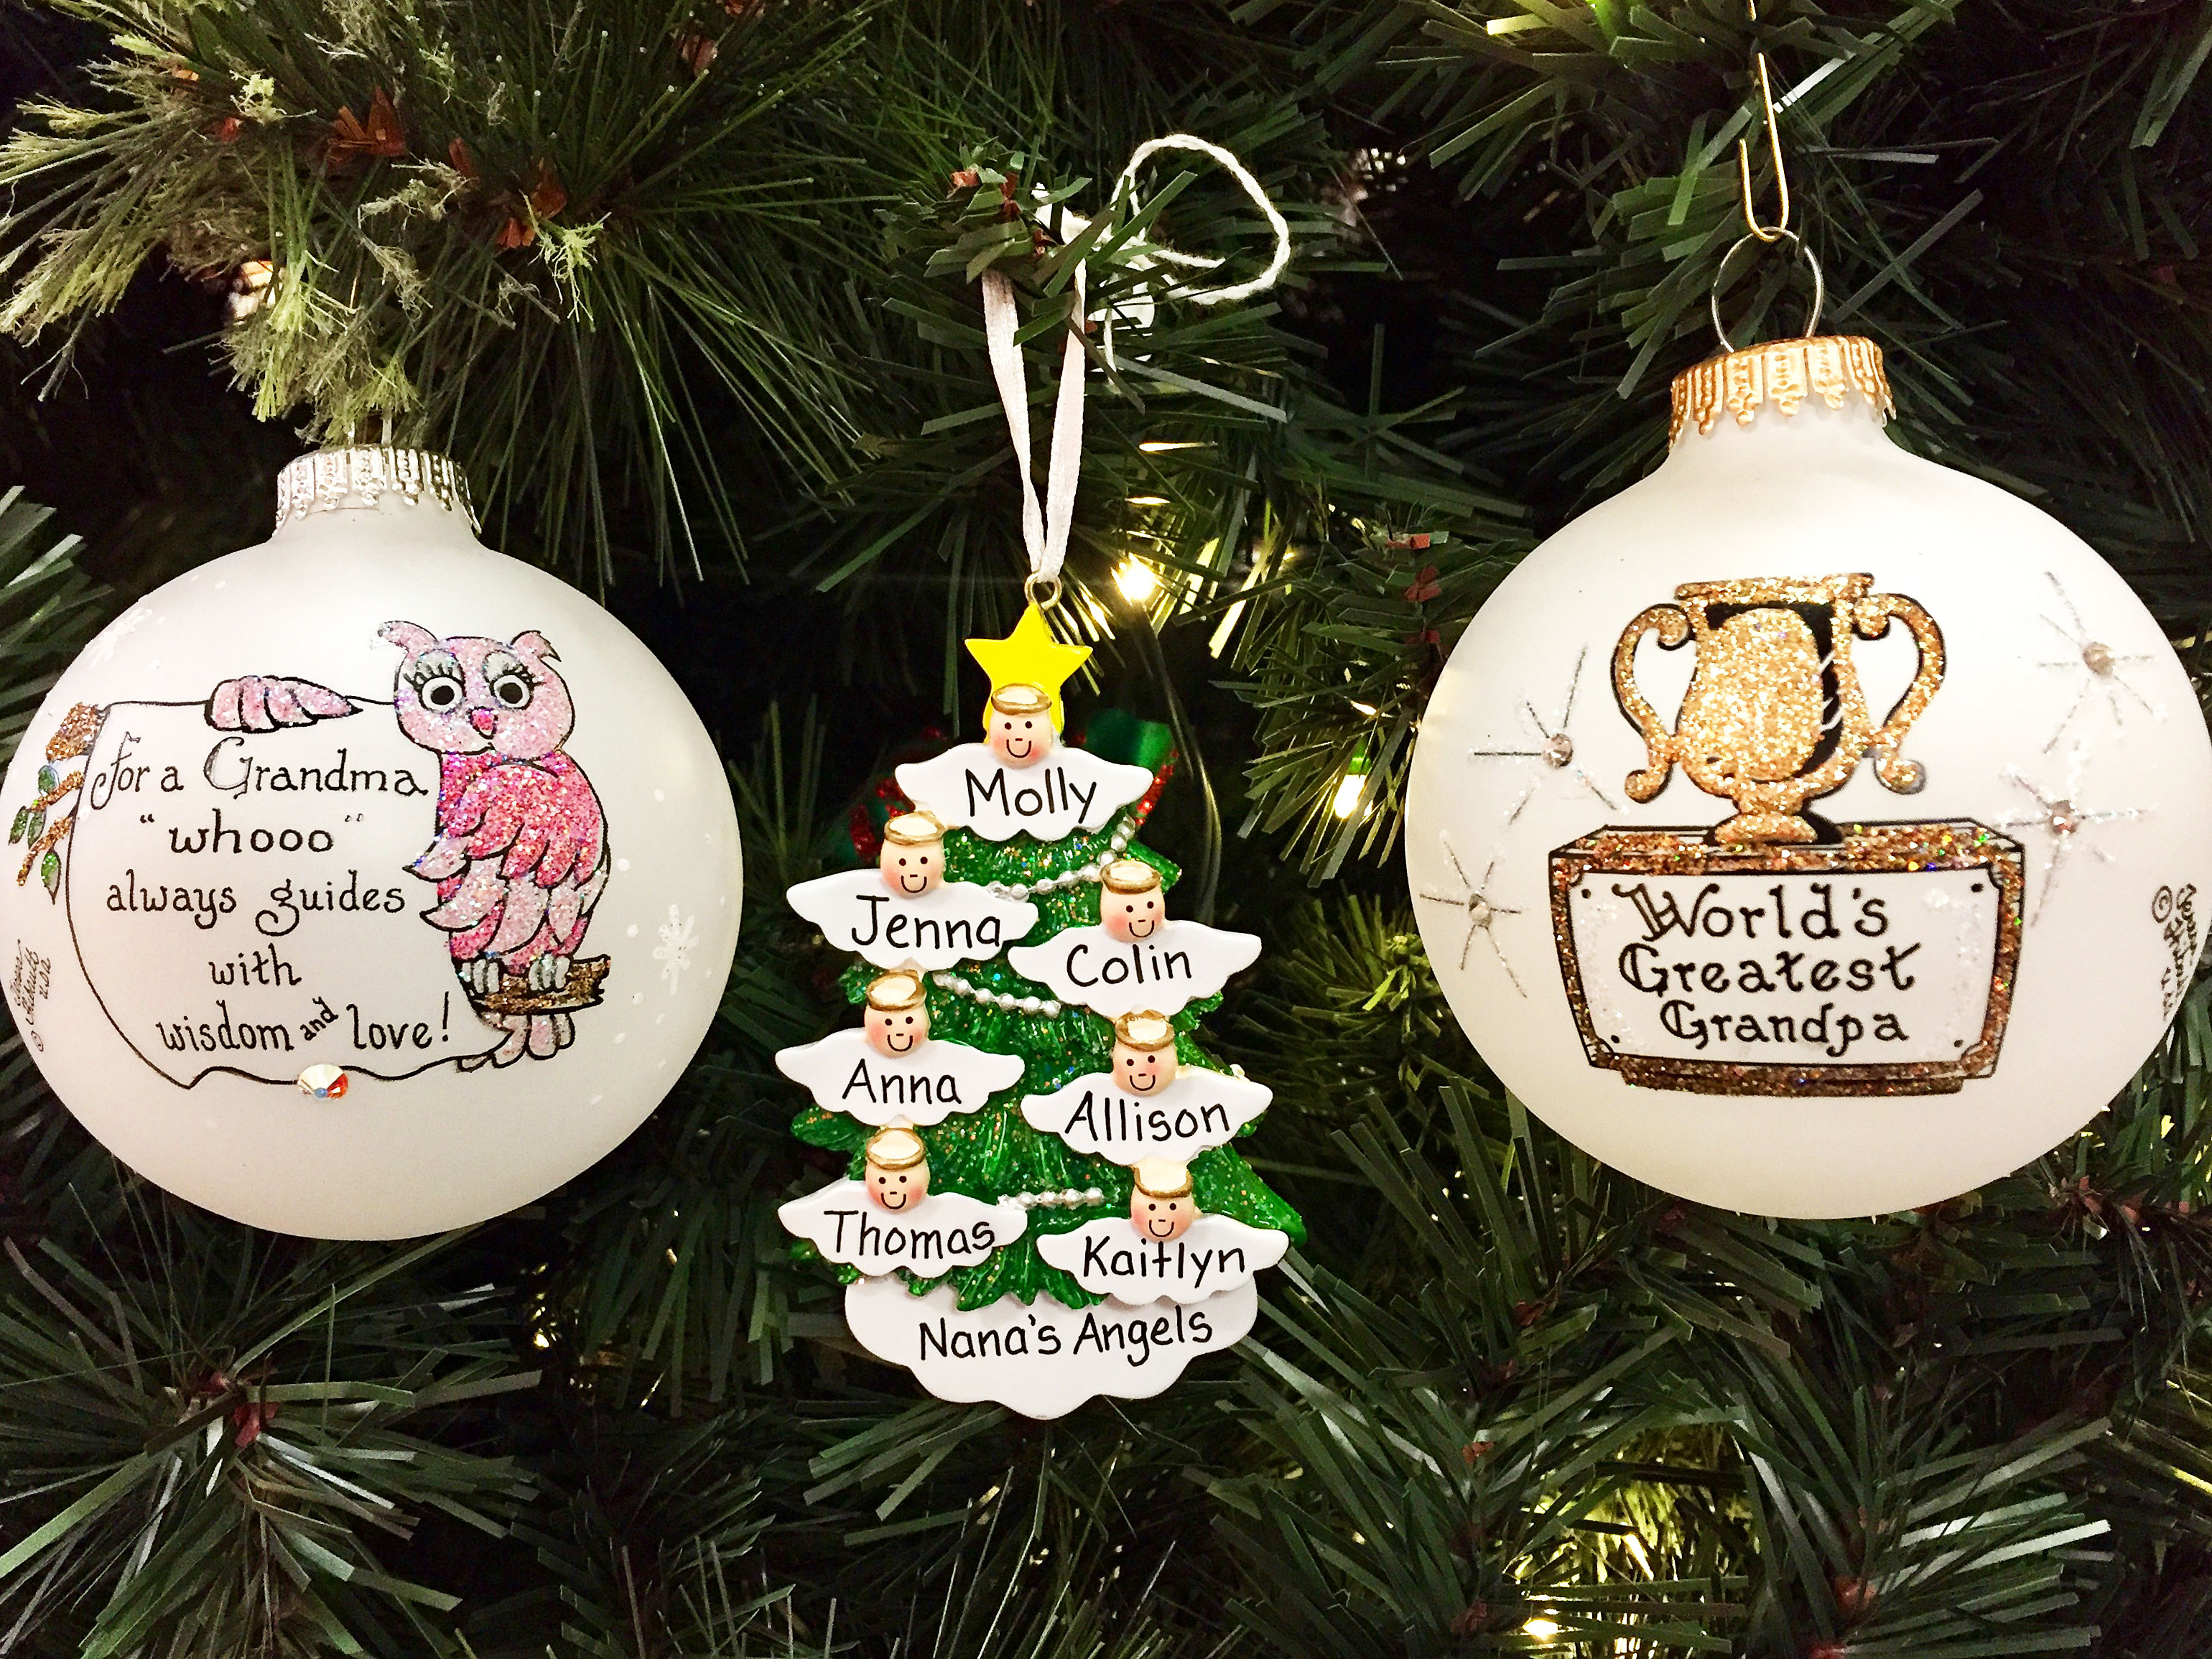 Three ornaments for grandparents. One has a wise owl for grandma and another has a trophy for world's best grandpa. | OrnamentShop.com